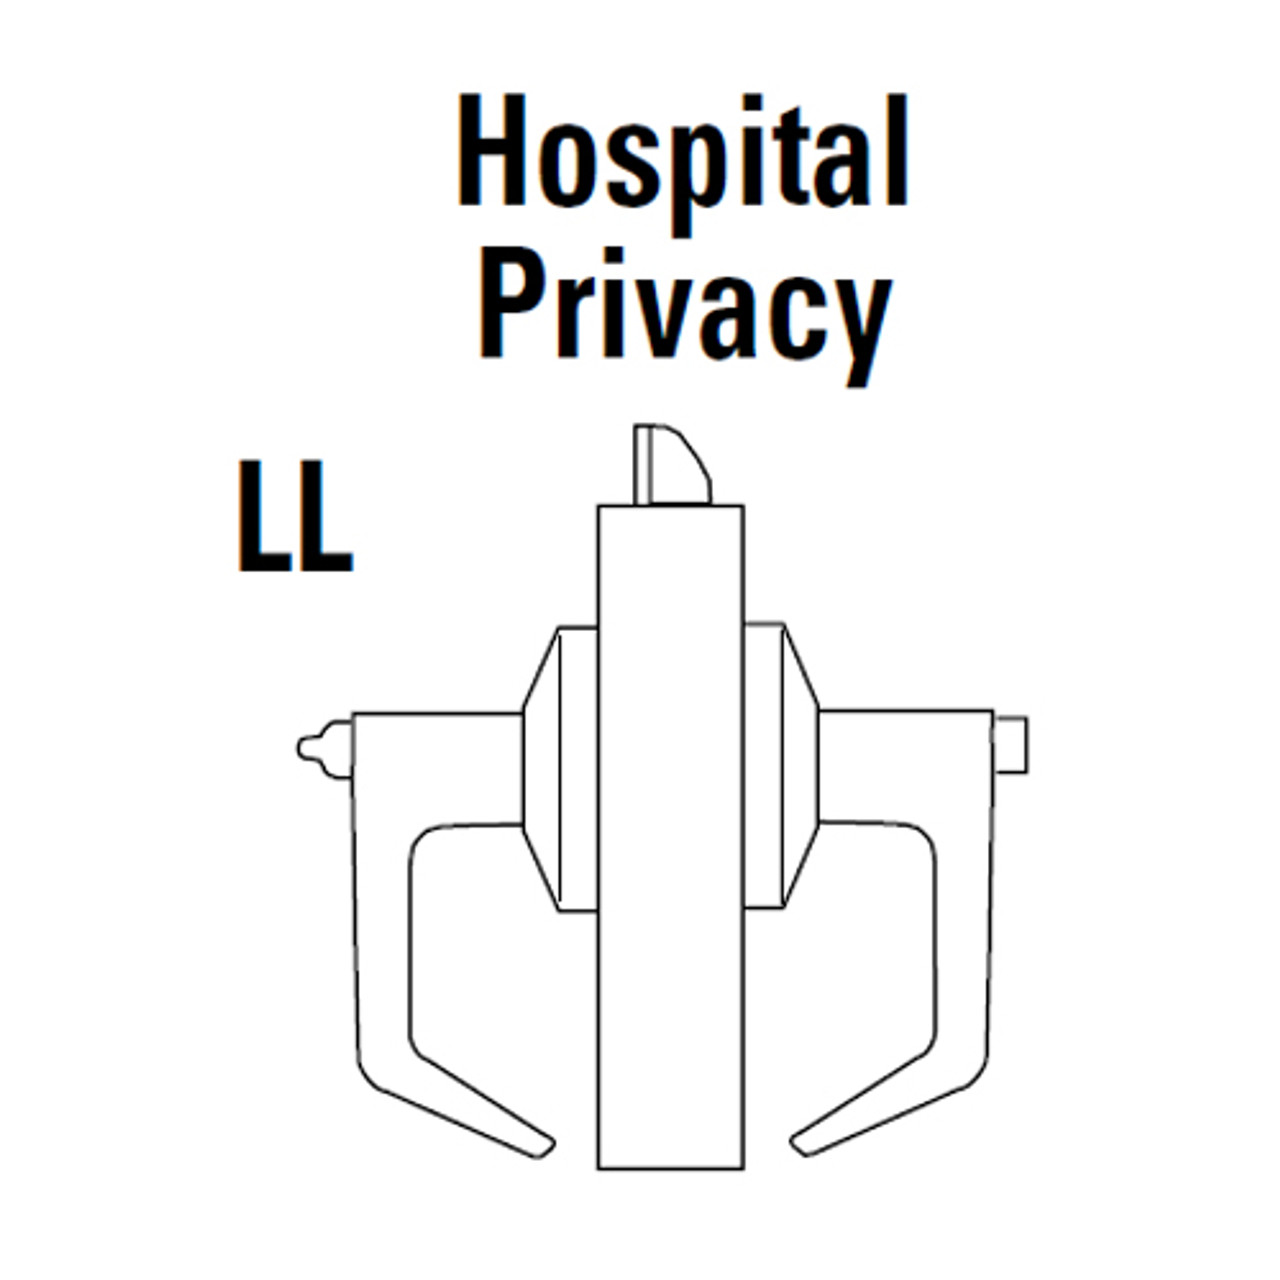 9K30LL14LS3612 Best 9K Series Hospital Privacy Heavy Duty Cylindrical Lever Locks in Satin Bronze